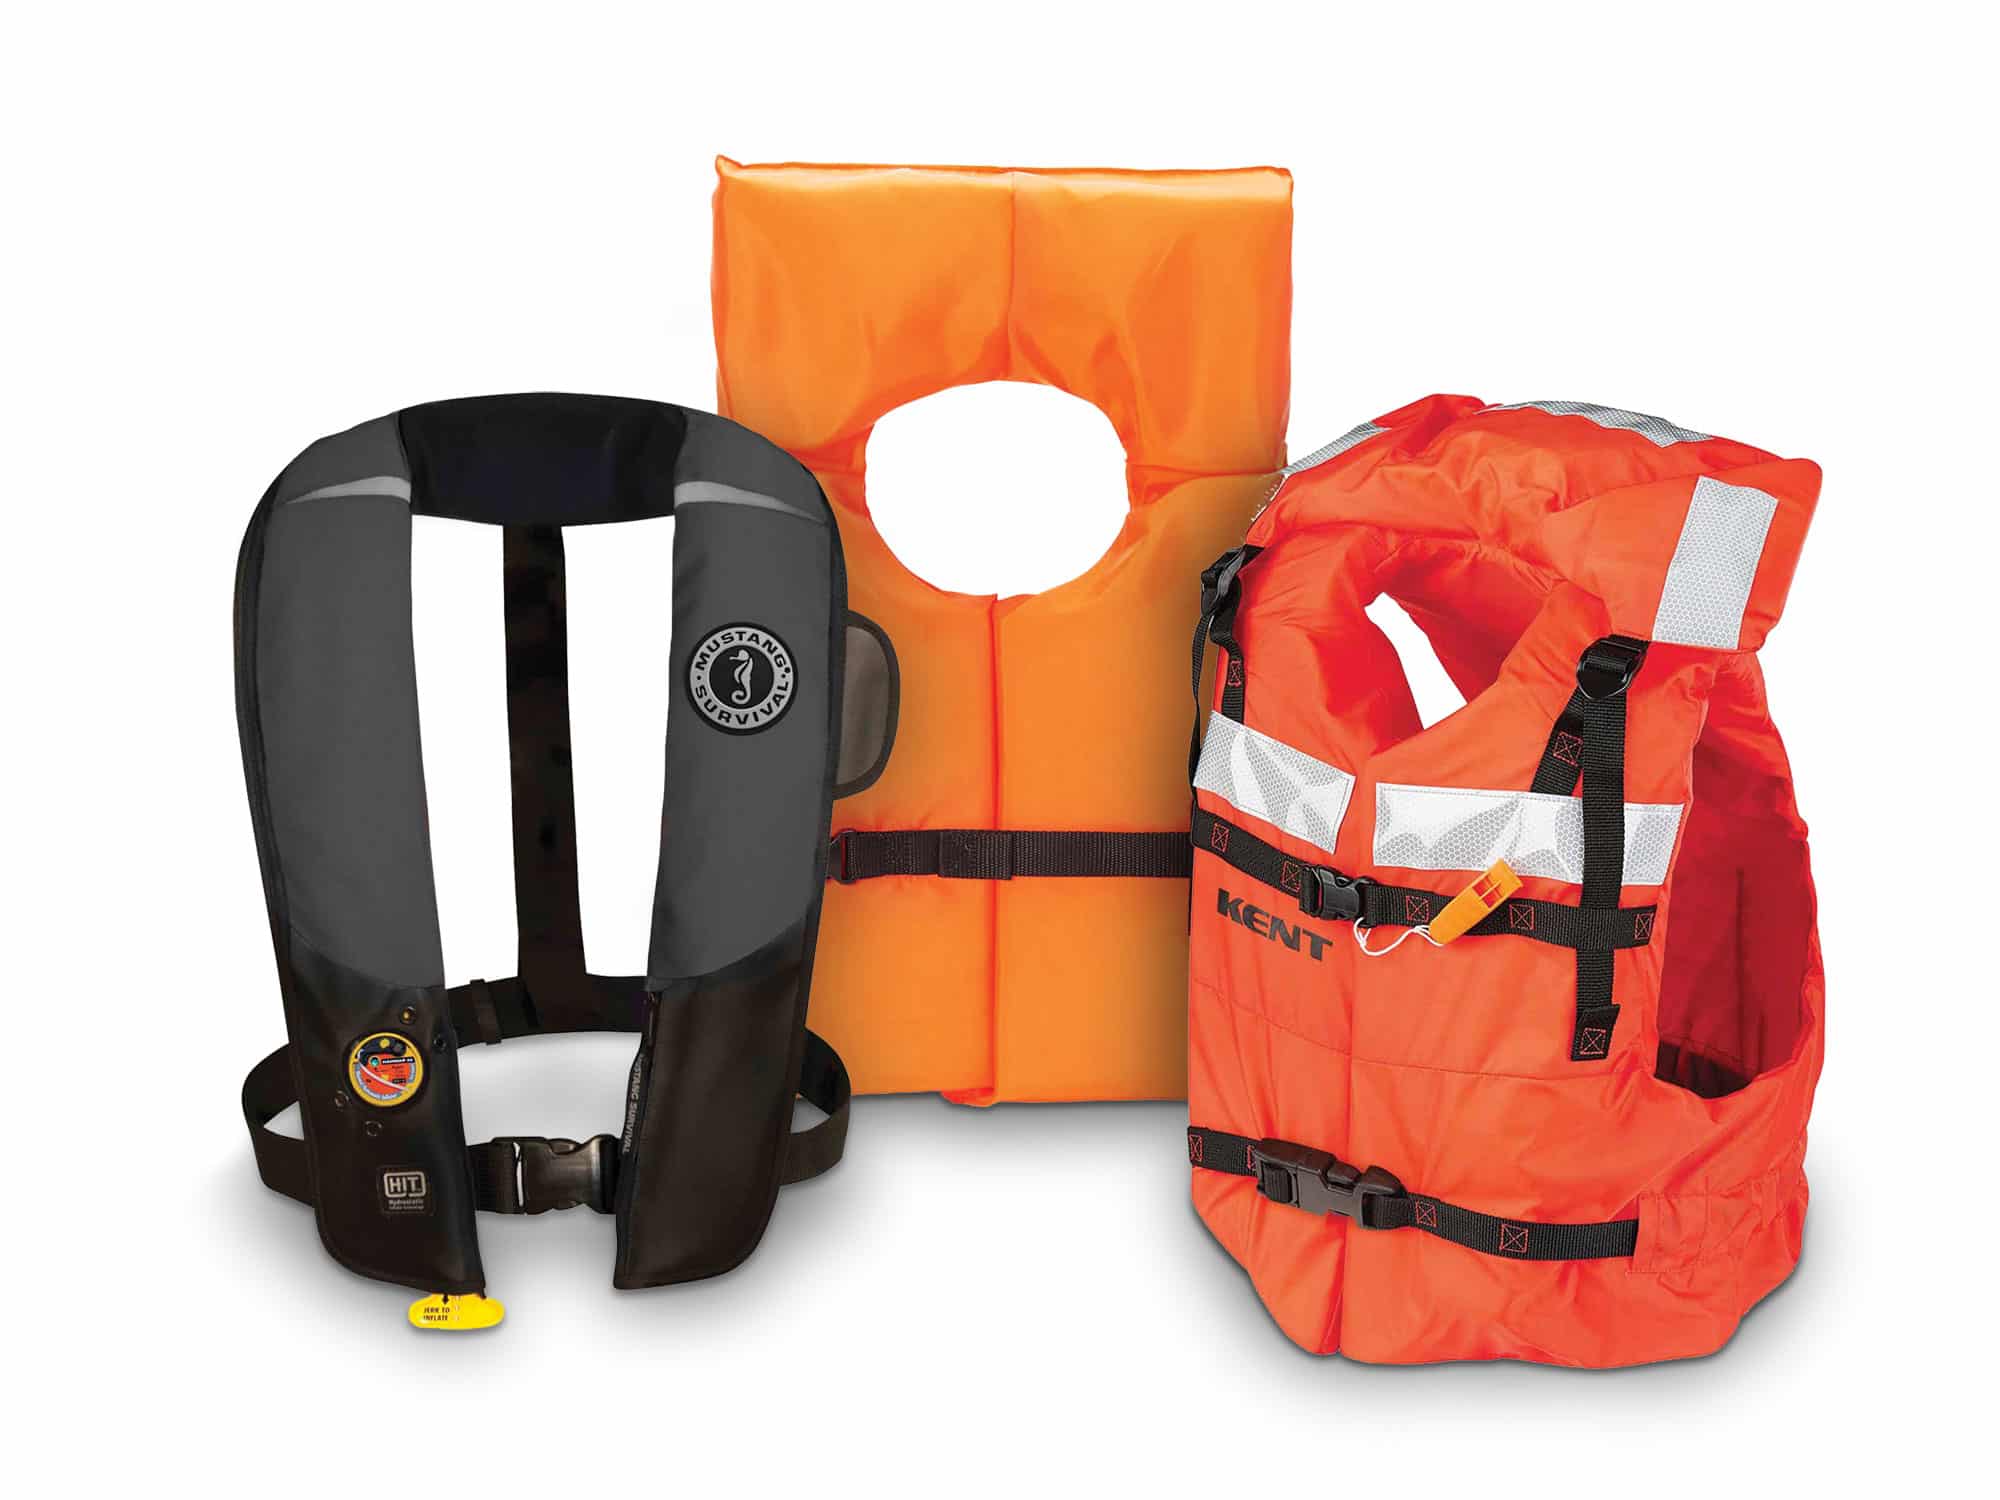 Picking the Right Life Jacket